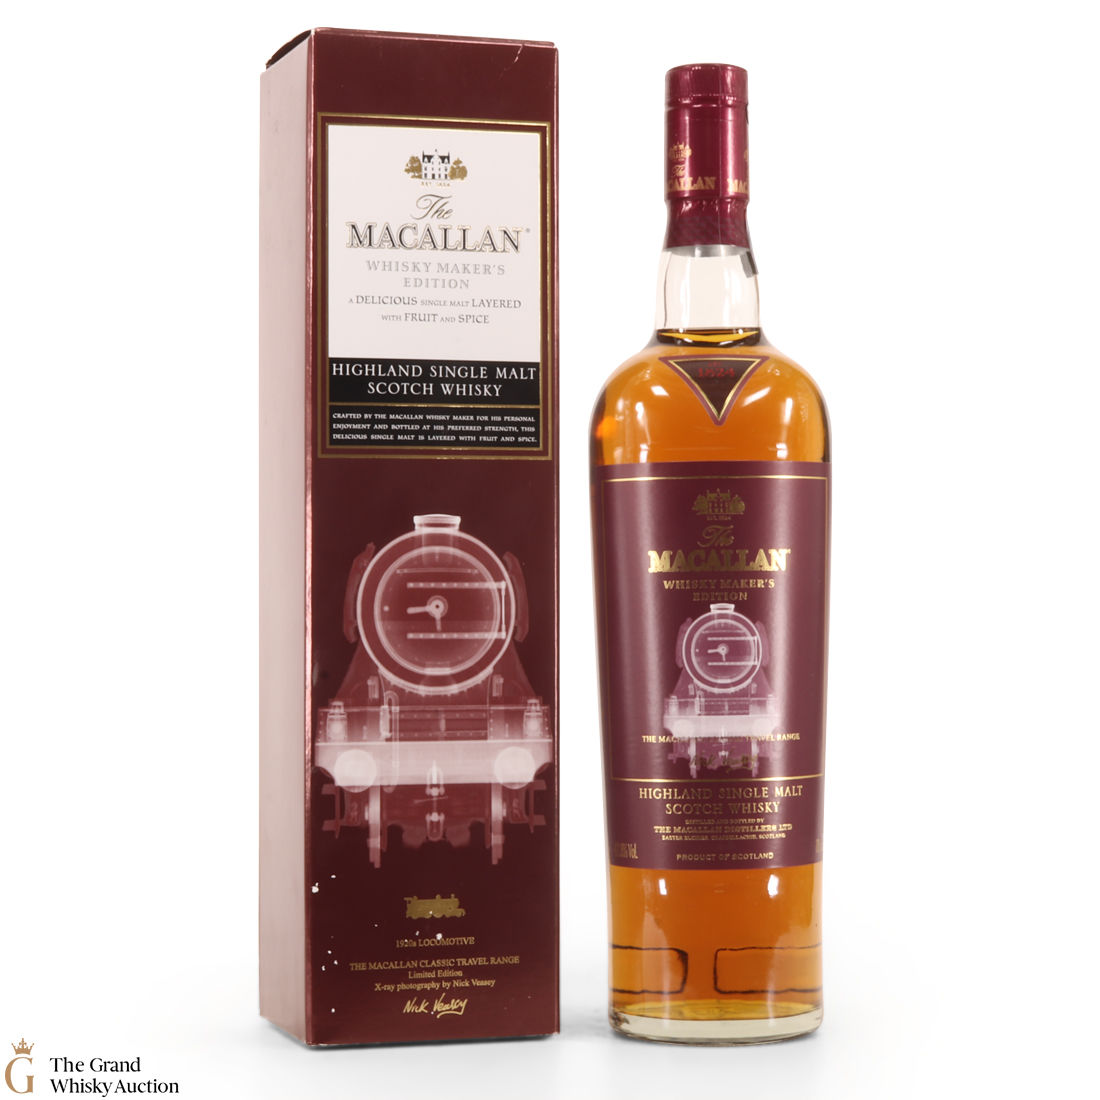 Macallan Whisky Maker S Edition Classic Travel Range 1920s Locomotive Auction The Grand Whisky Auction